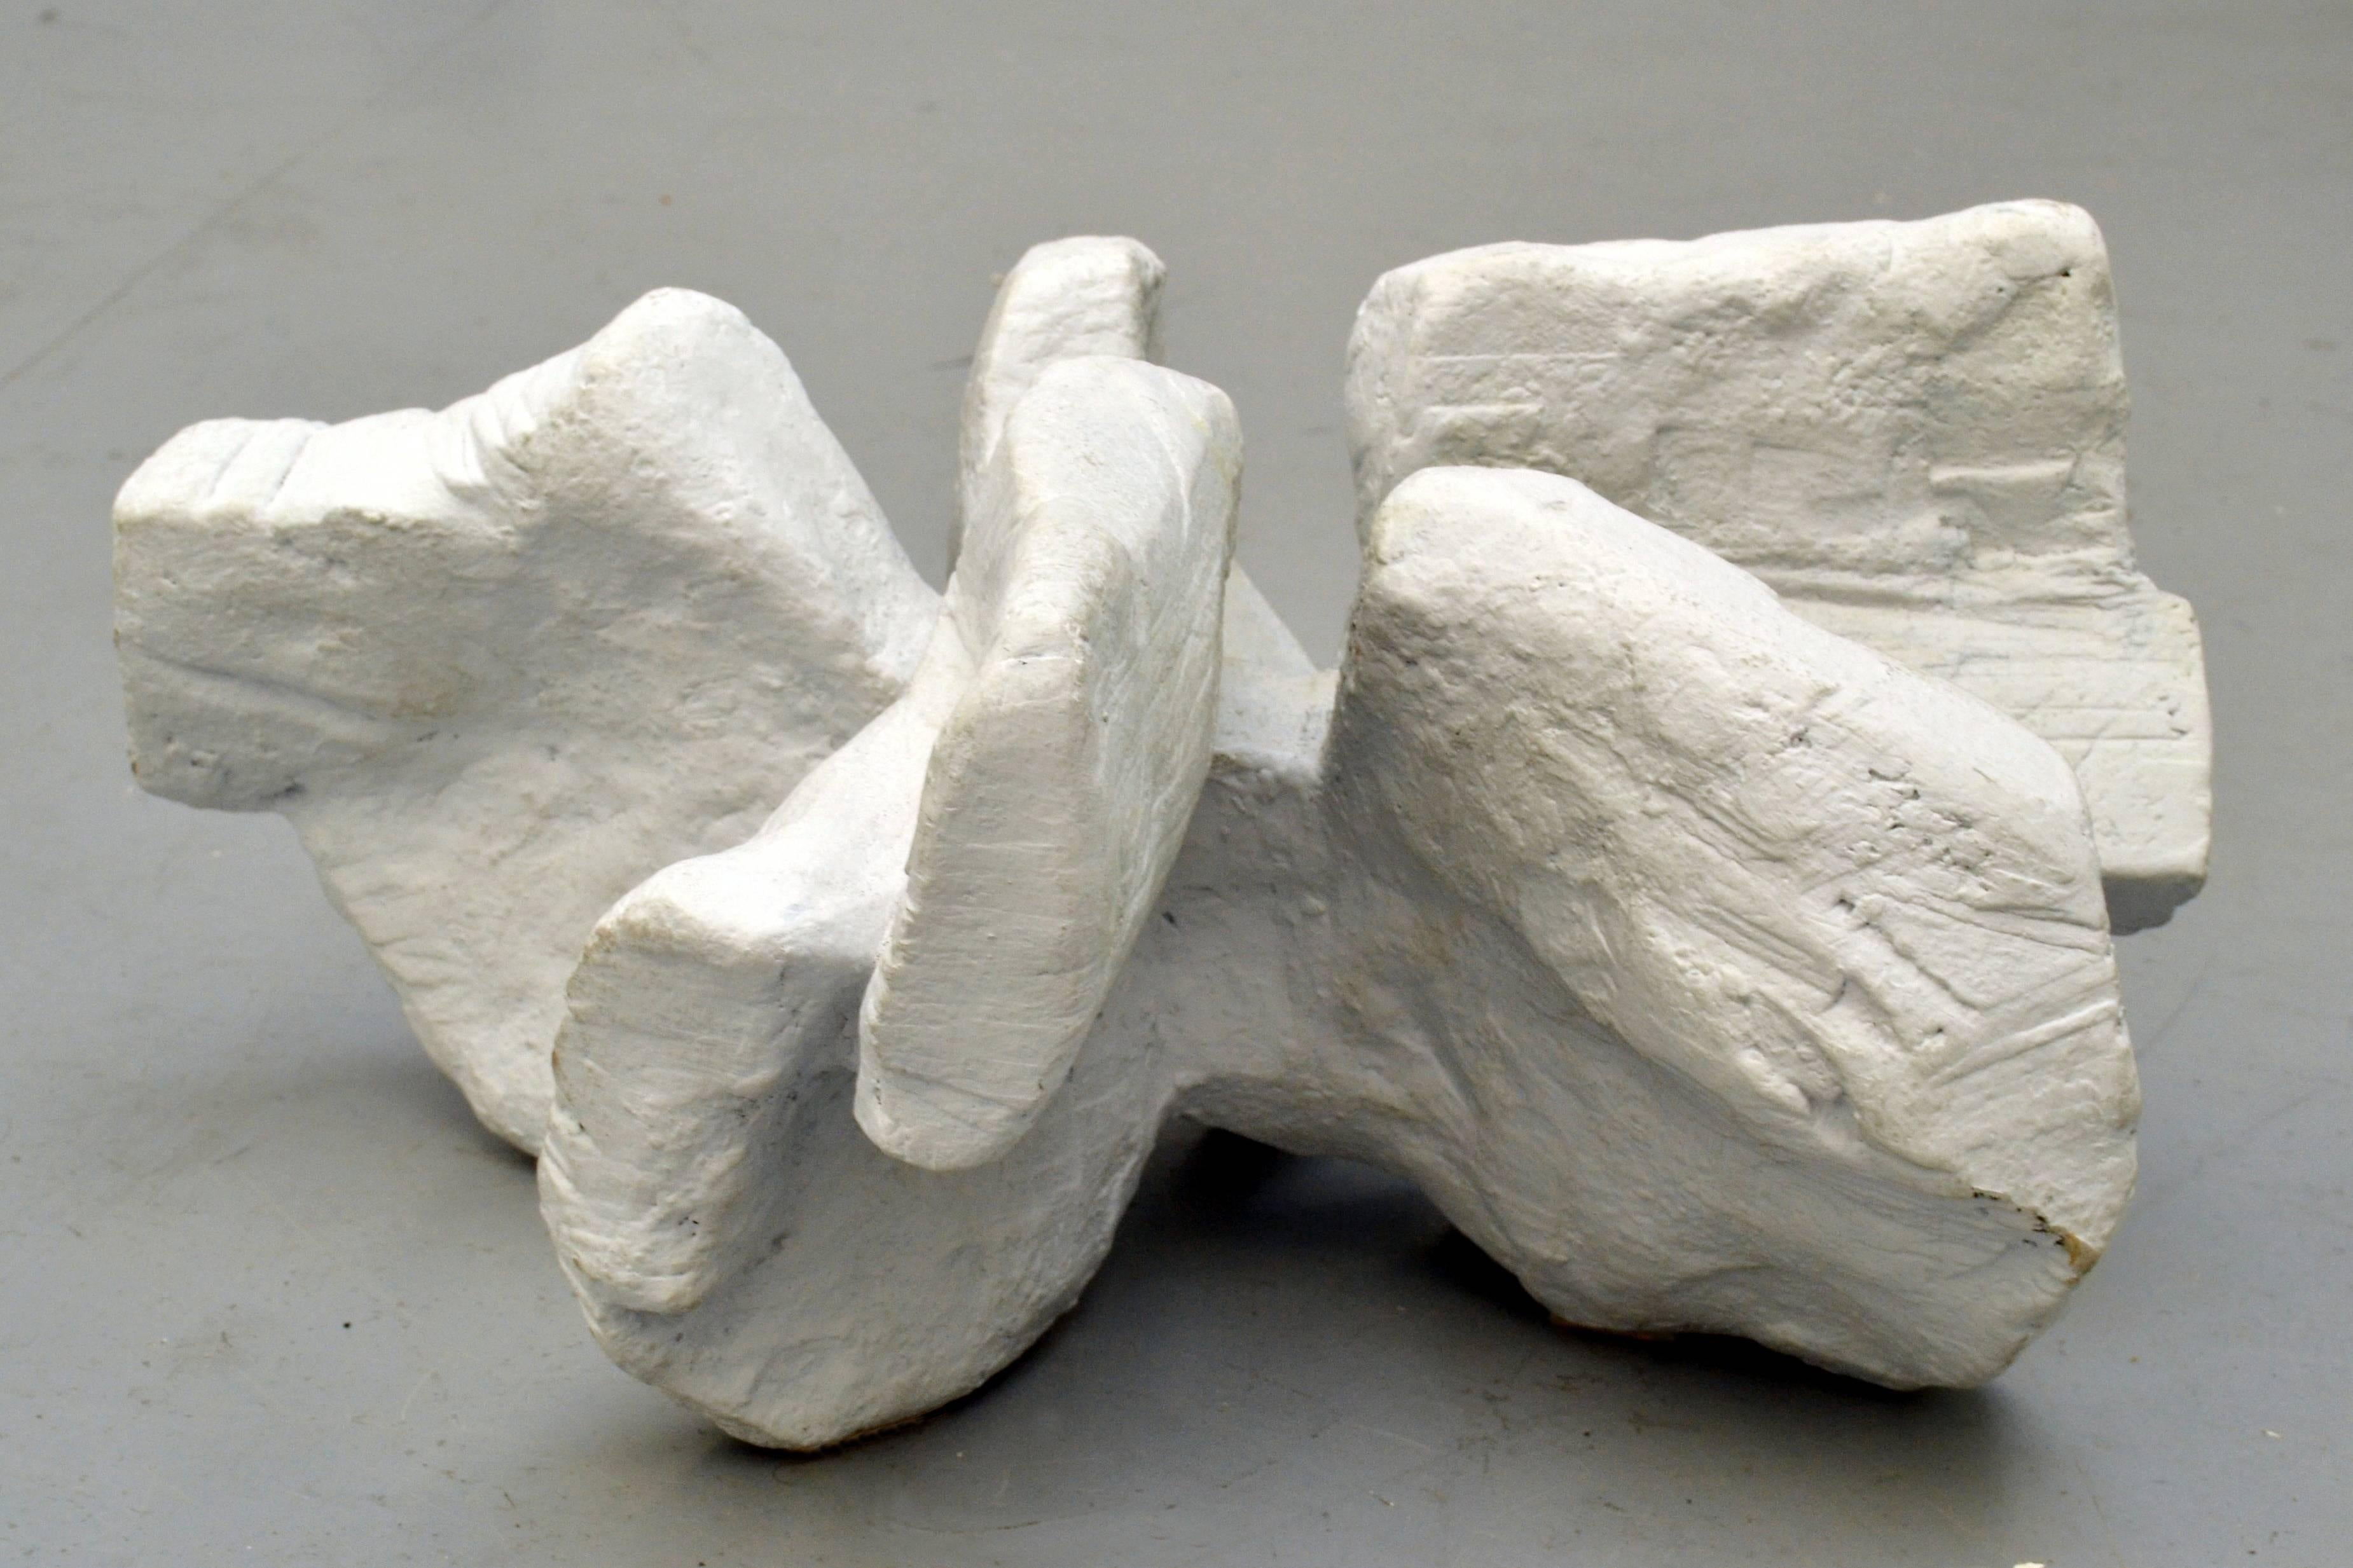 This hand formed ceramic sculpture looks like coral or chalk cliffs on the British coast line. 
There are more sculptures in this series available as you can see in image 6&7.
Bryan Blow 1931-2009 was born and trained as an artist in London. He